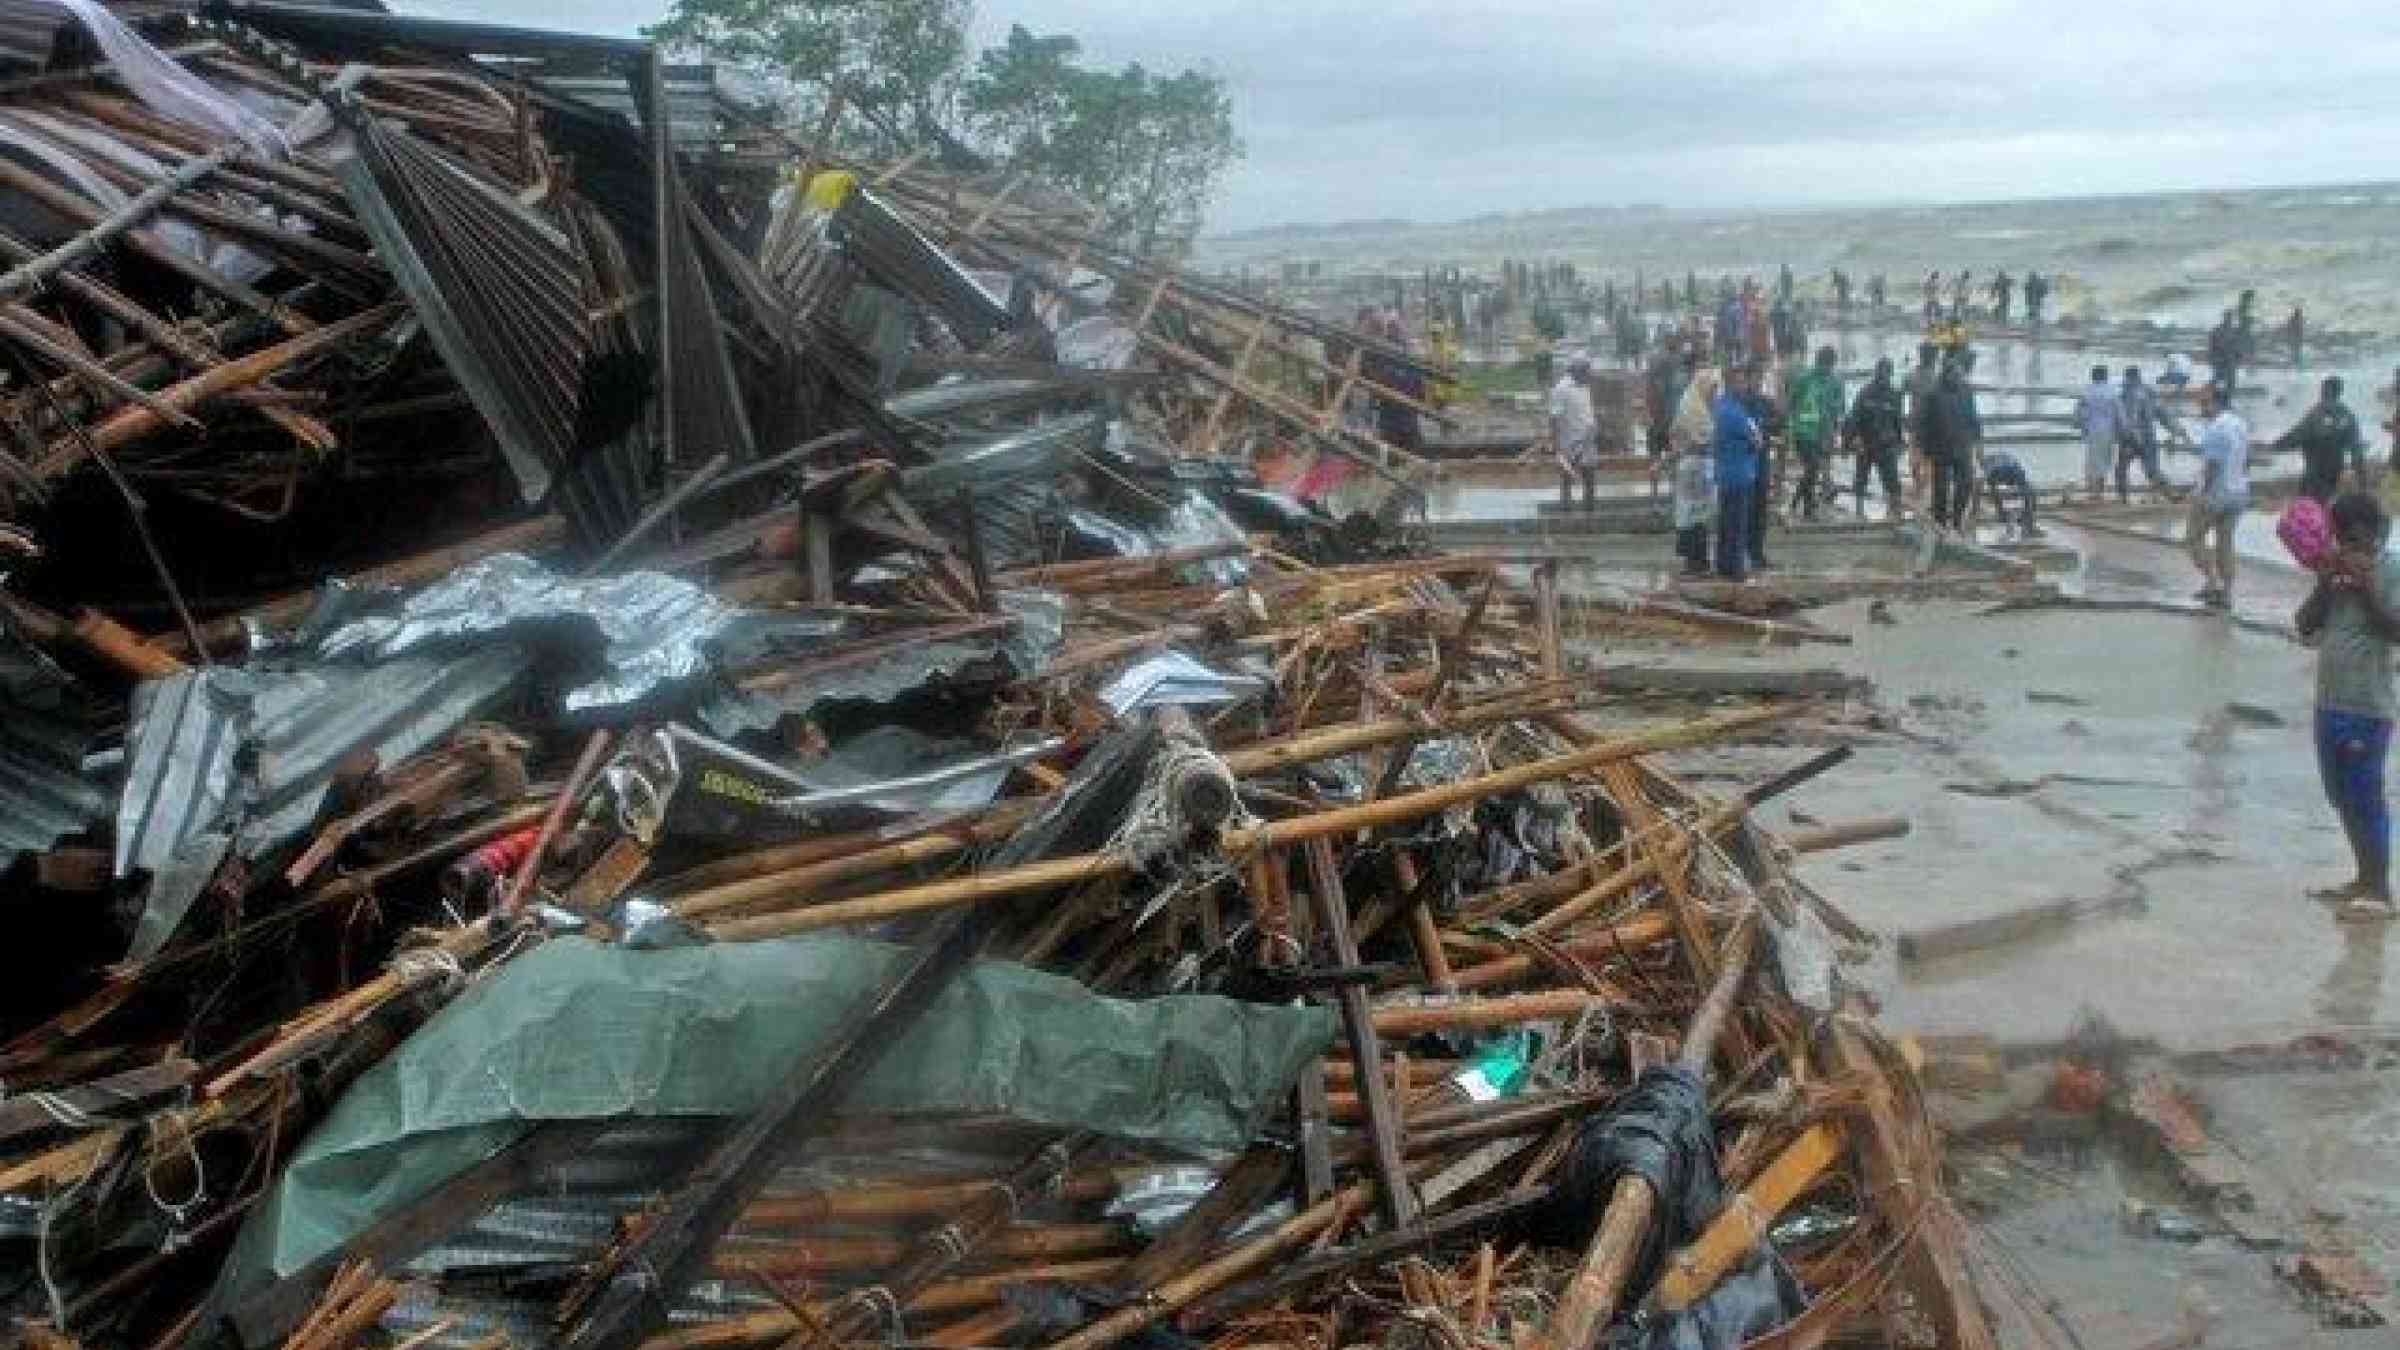 Cyclone Roanu caused significant damage along the Bangladesh coastline when it made landfall yesterday near Chittagong